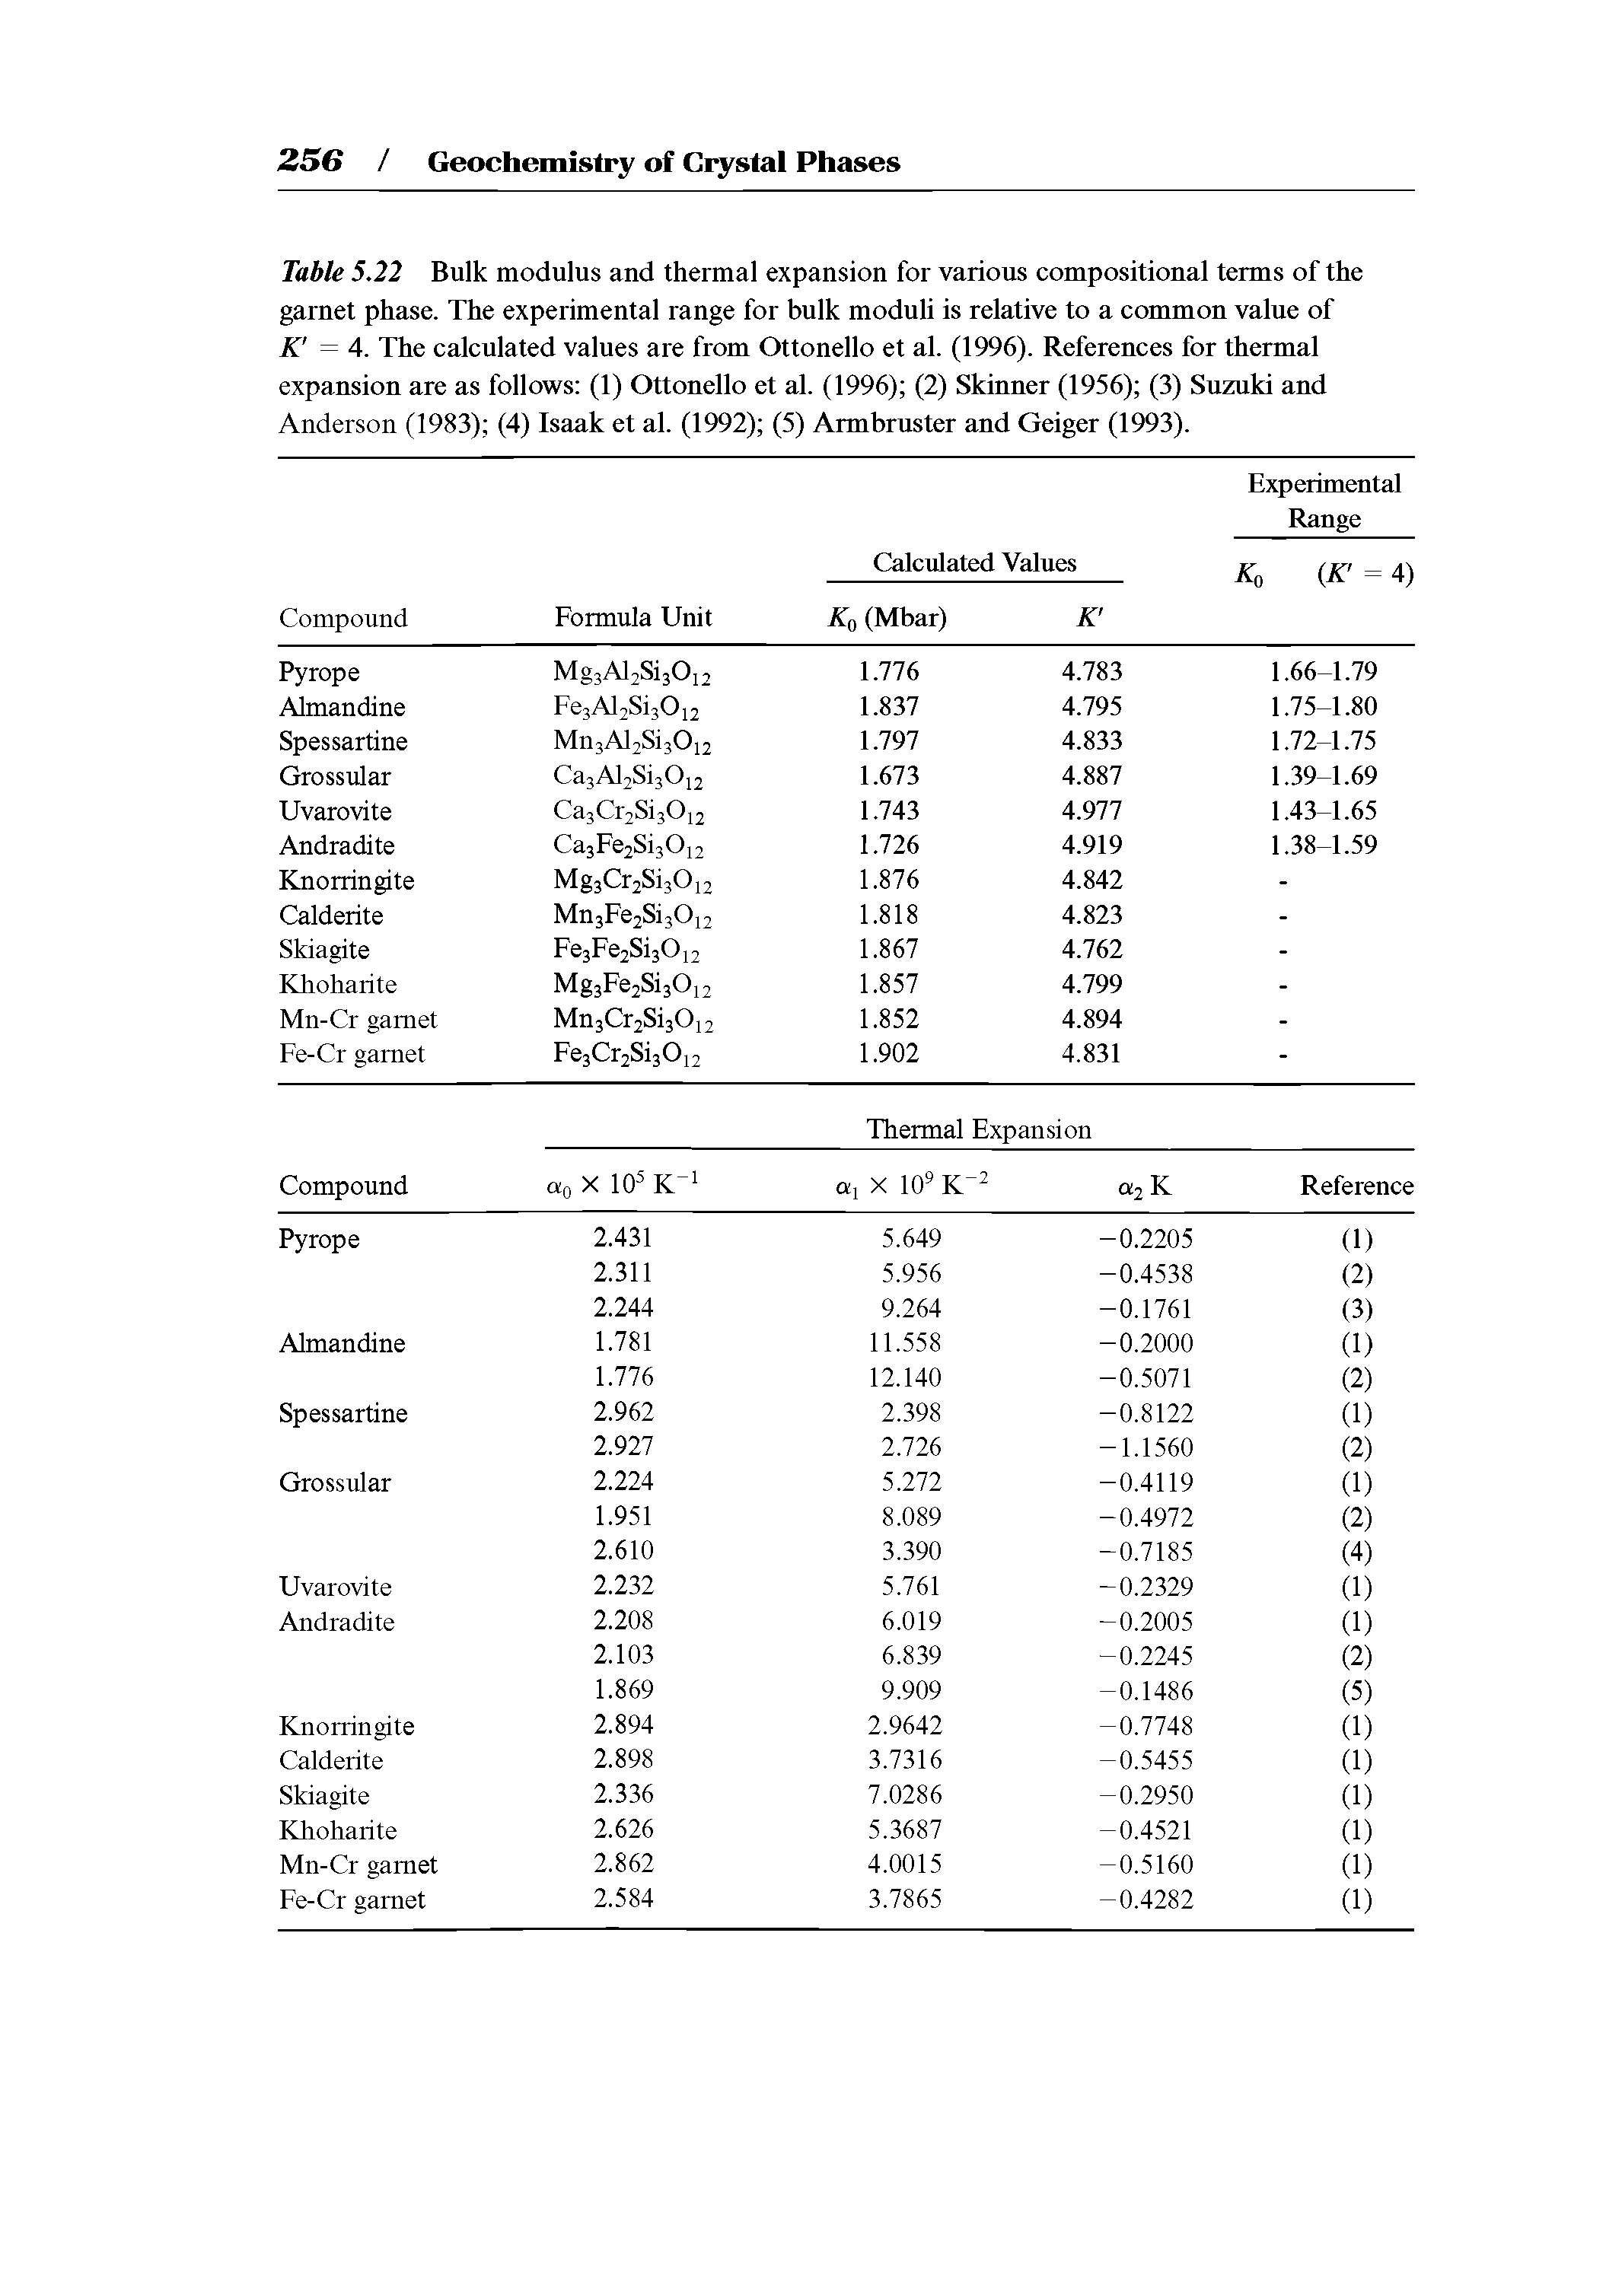 Table 5.22 Bulk modulus and thermal expansion for various compositional terms of the garnet phase. The experimental range for bulk moduli is relative to a common value of K = 4. The calculated values are from Ottonello et al. (1996). References for thermal expansion are as follows (1) Ottonello et al. (1996) (2) Skinner (1956) (3) Suzuki and Anderson (1983) (4) Isaak et al. (1992) (5) Armbruster and Geiger (1993). ...